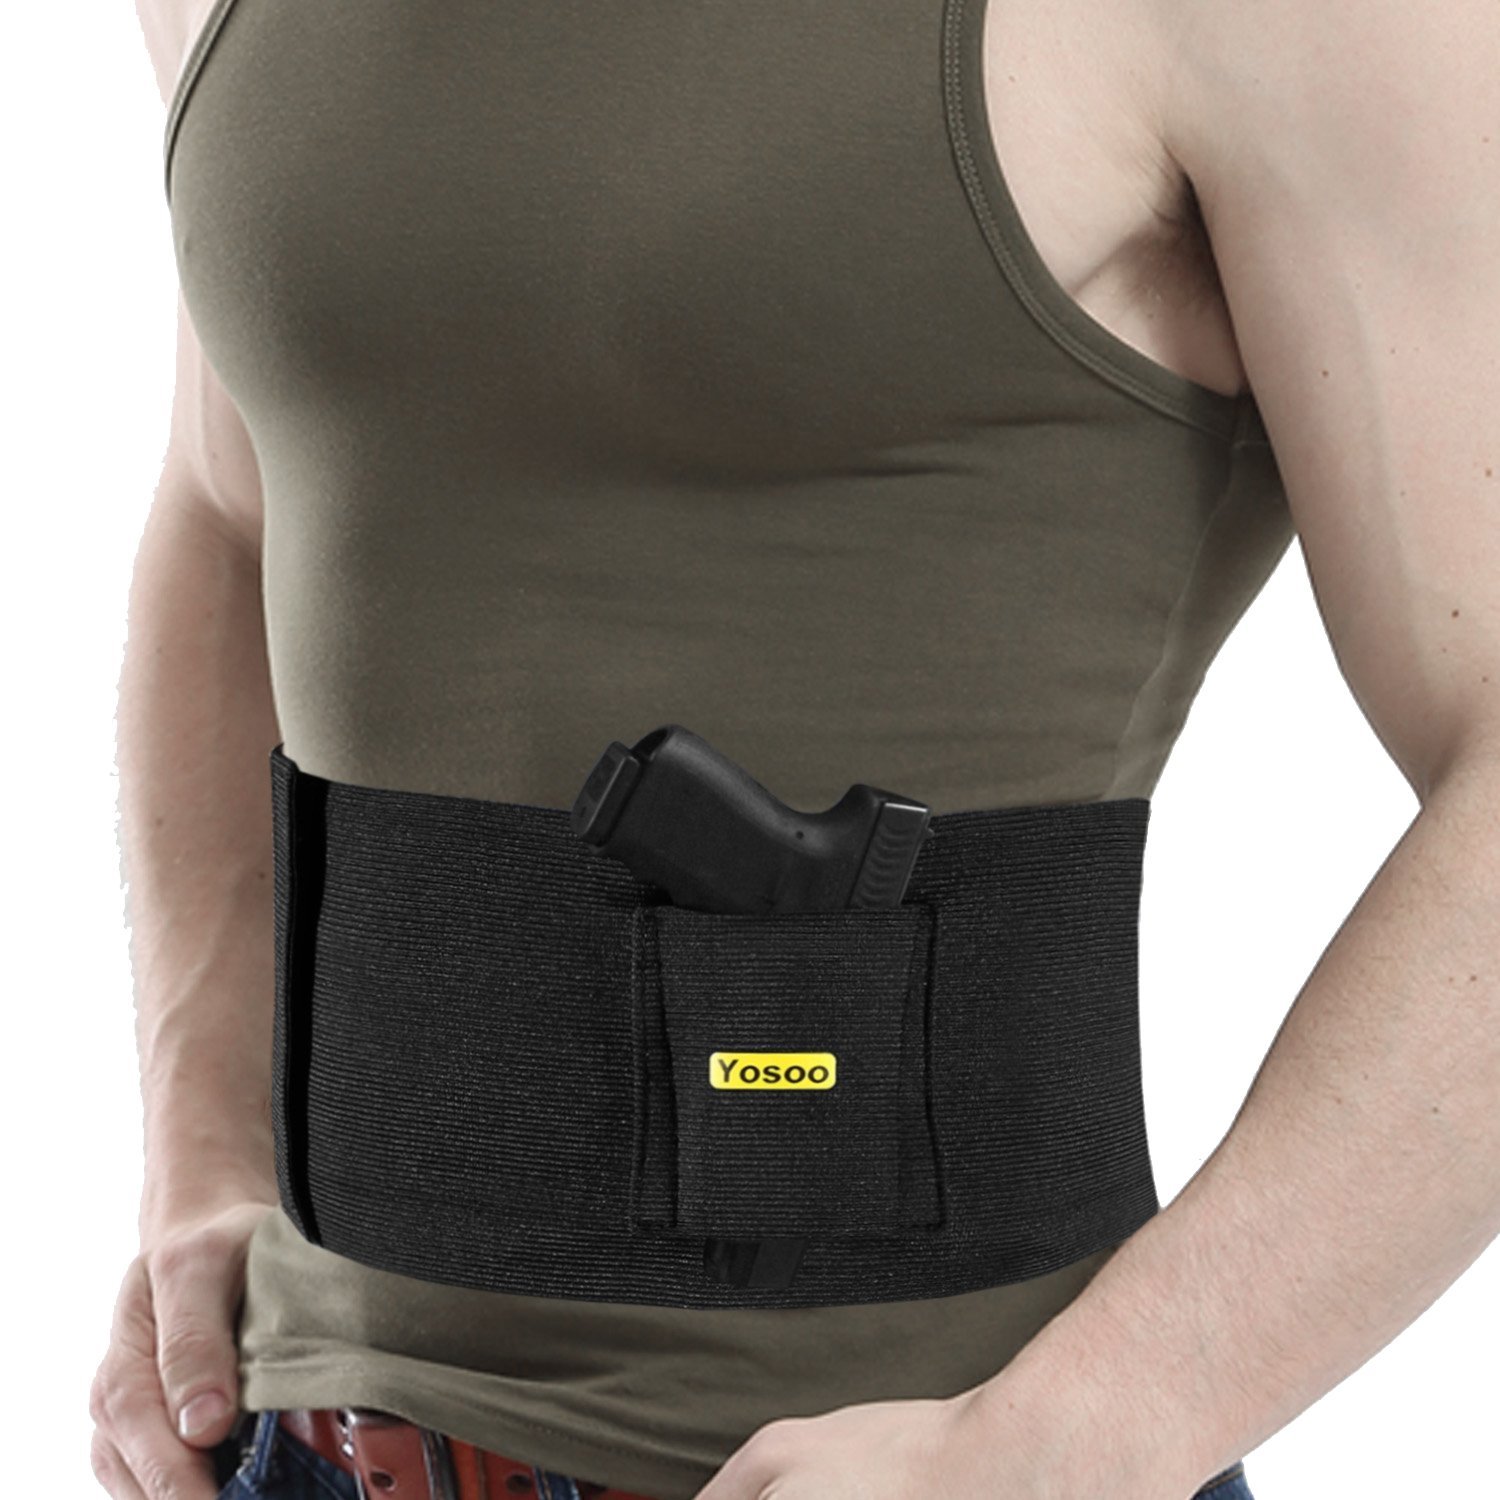 Top 5 Best Belly Band Holsters: Belly Band Concealment Holster Reviews ...